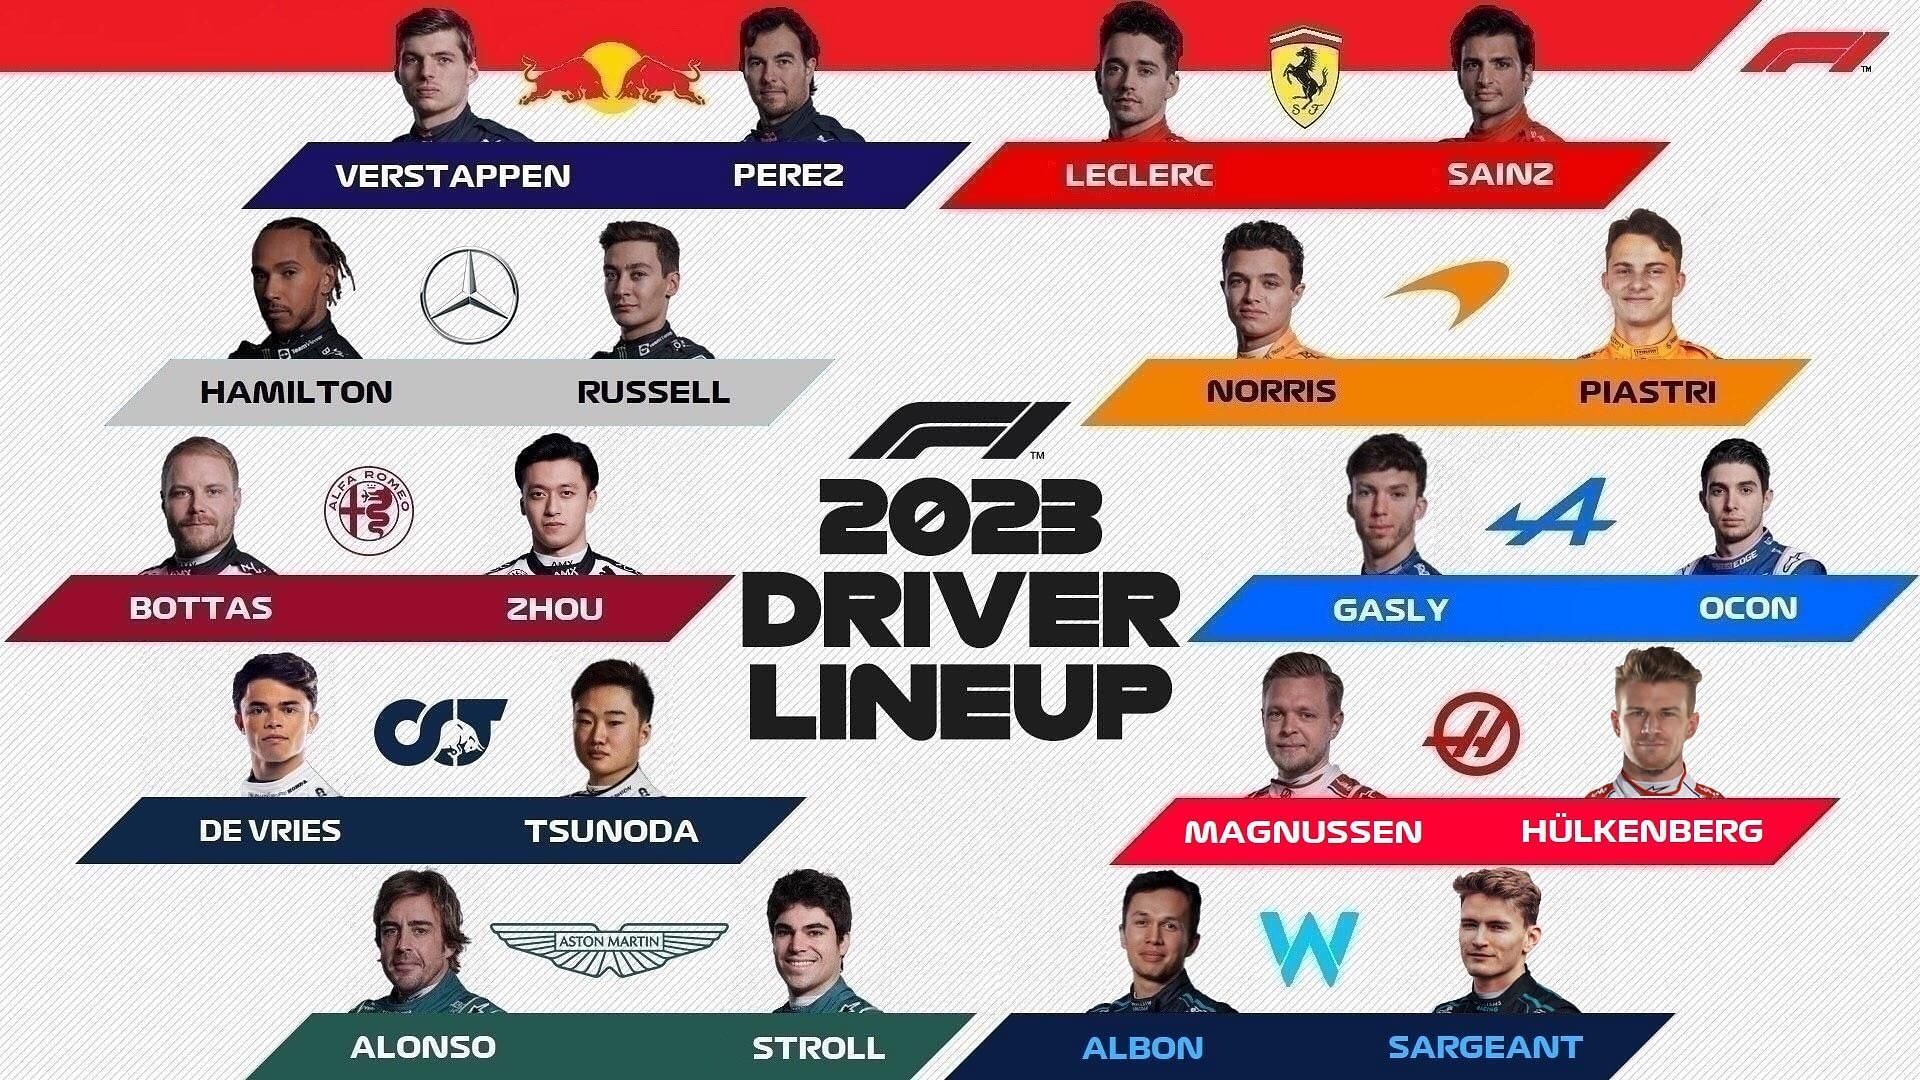 One key strength of every driver on the current F1 grid